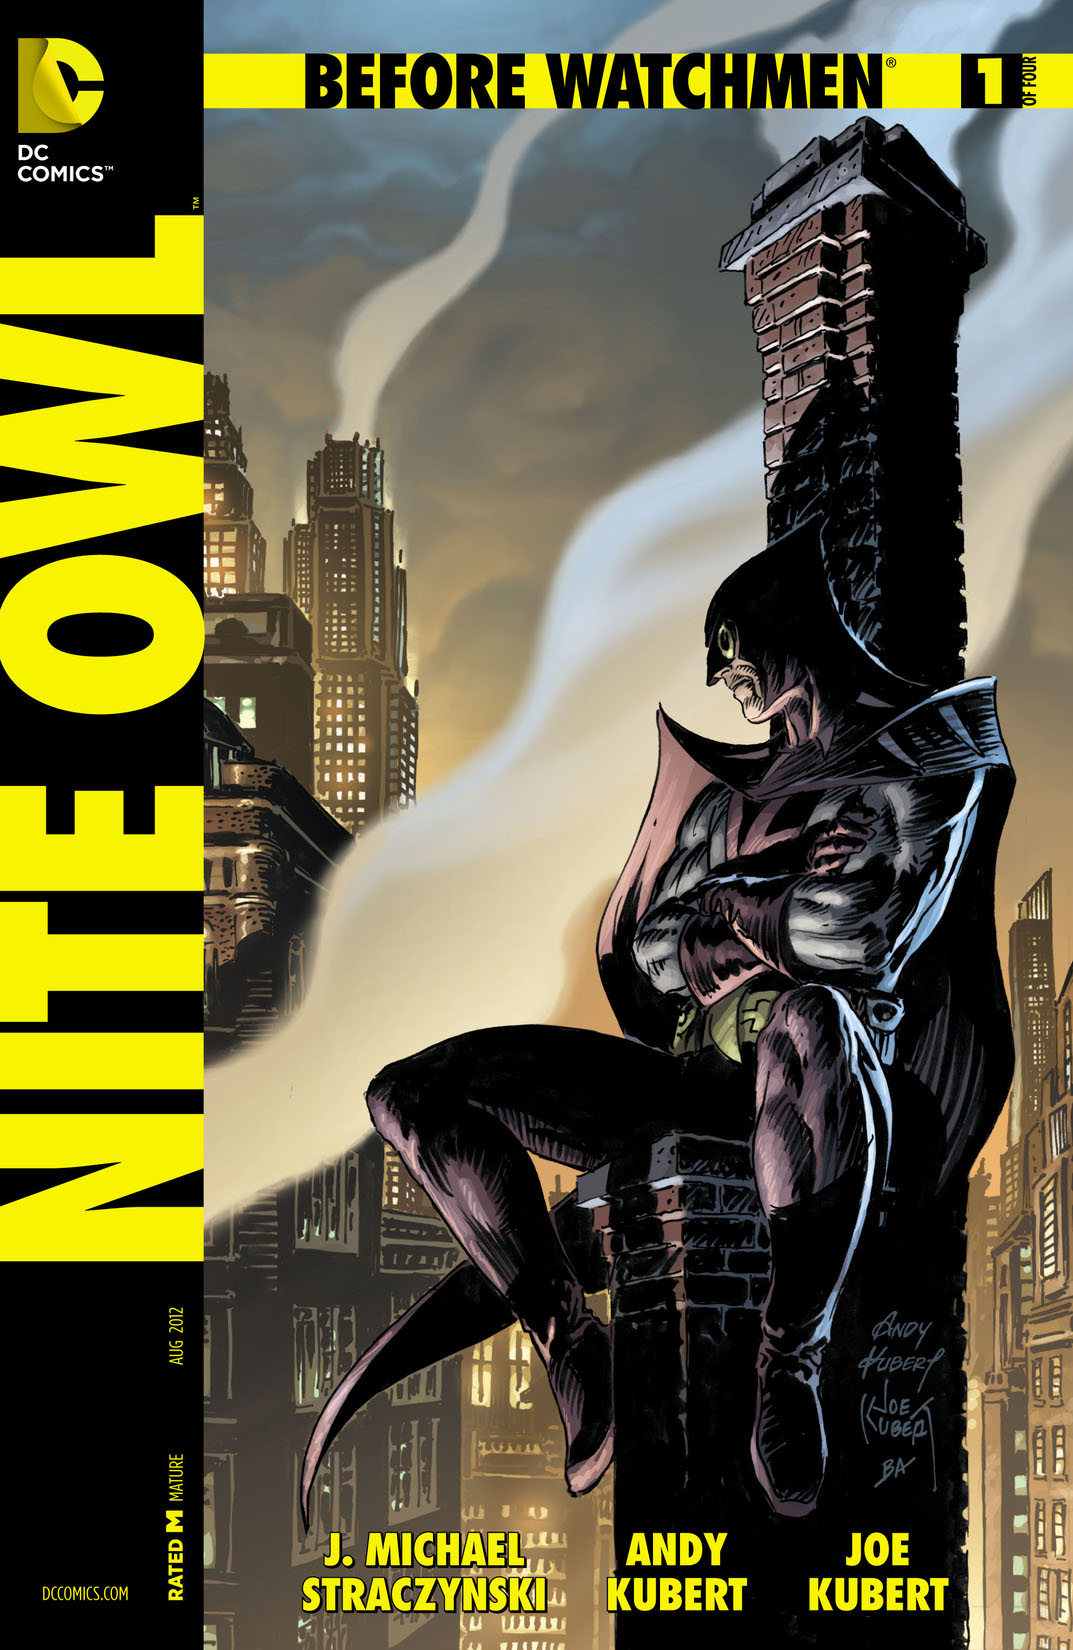 Before Watchmen: Nite Owl #1 preview images